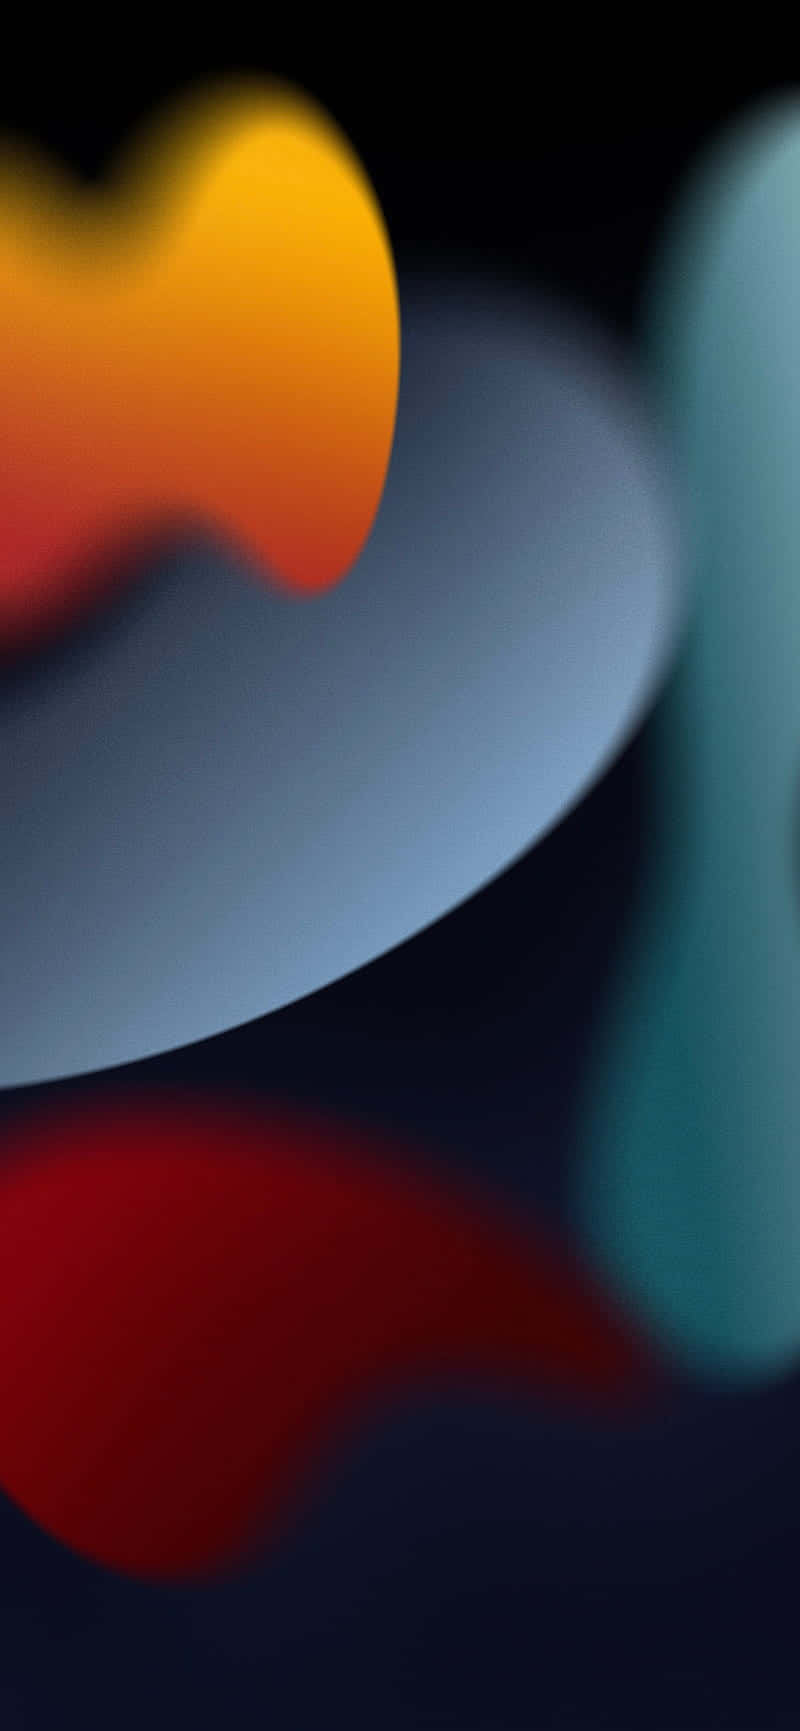 Blurred Blobs For Ios 3 Background